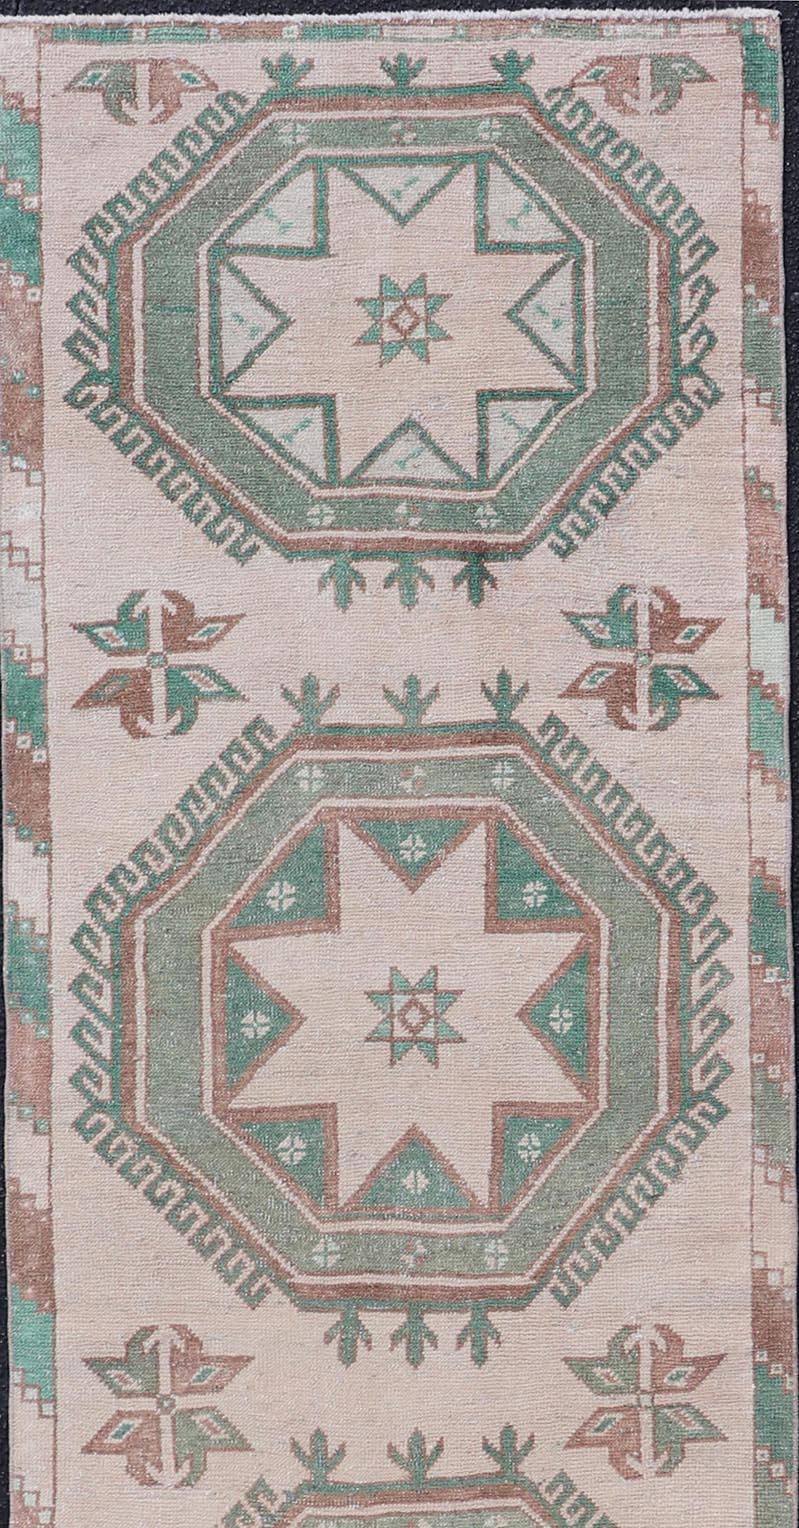 Vintage Turkish Oushak Runner with Repeating Geometric Design in Tan and Green In Good Condition For Sale In Atlanta, GA